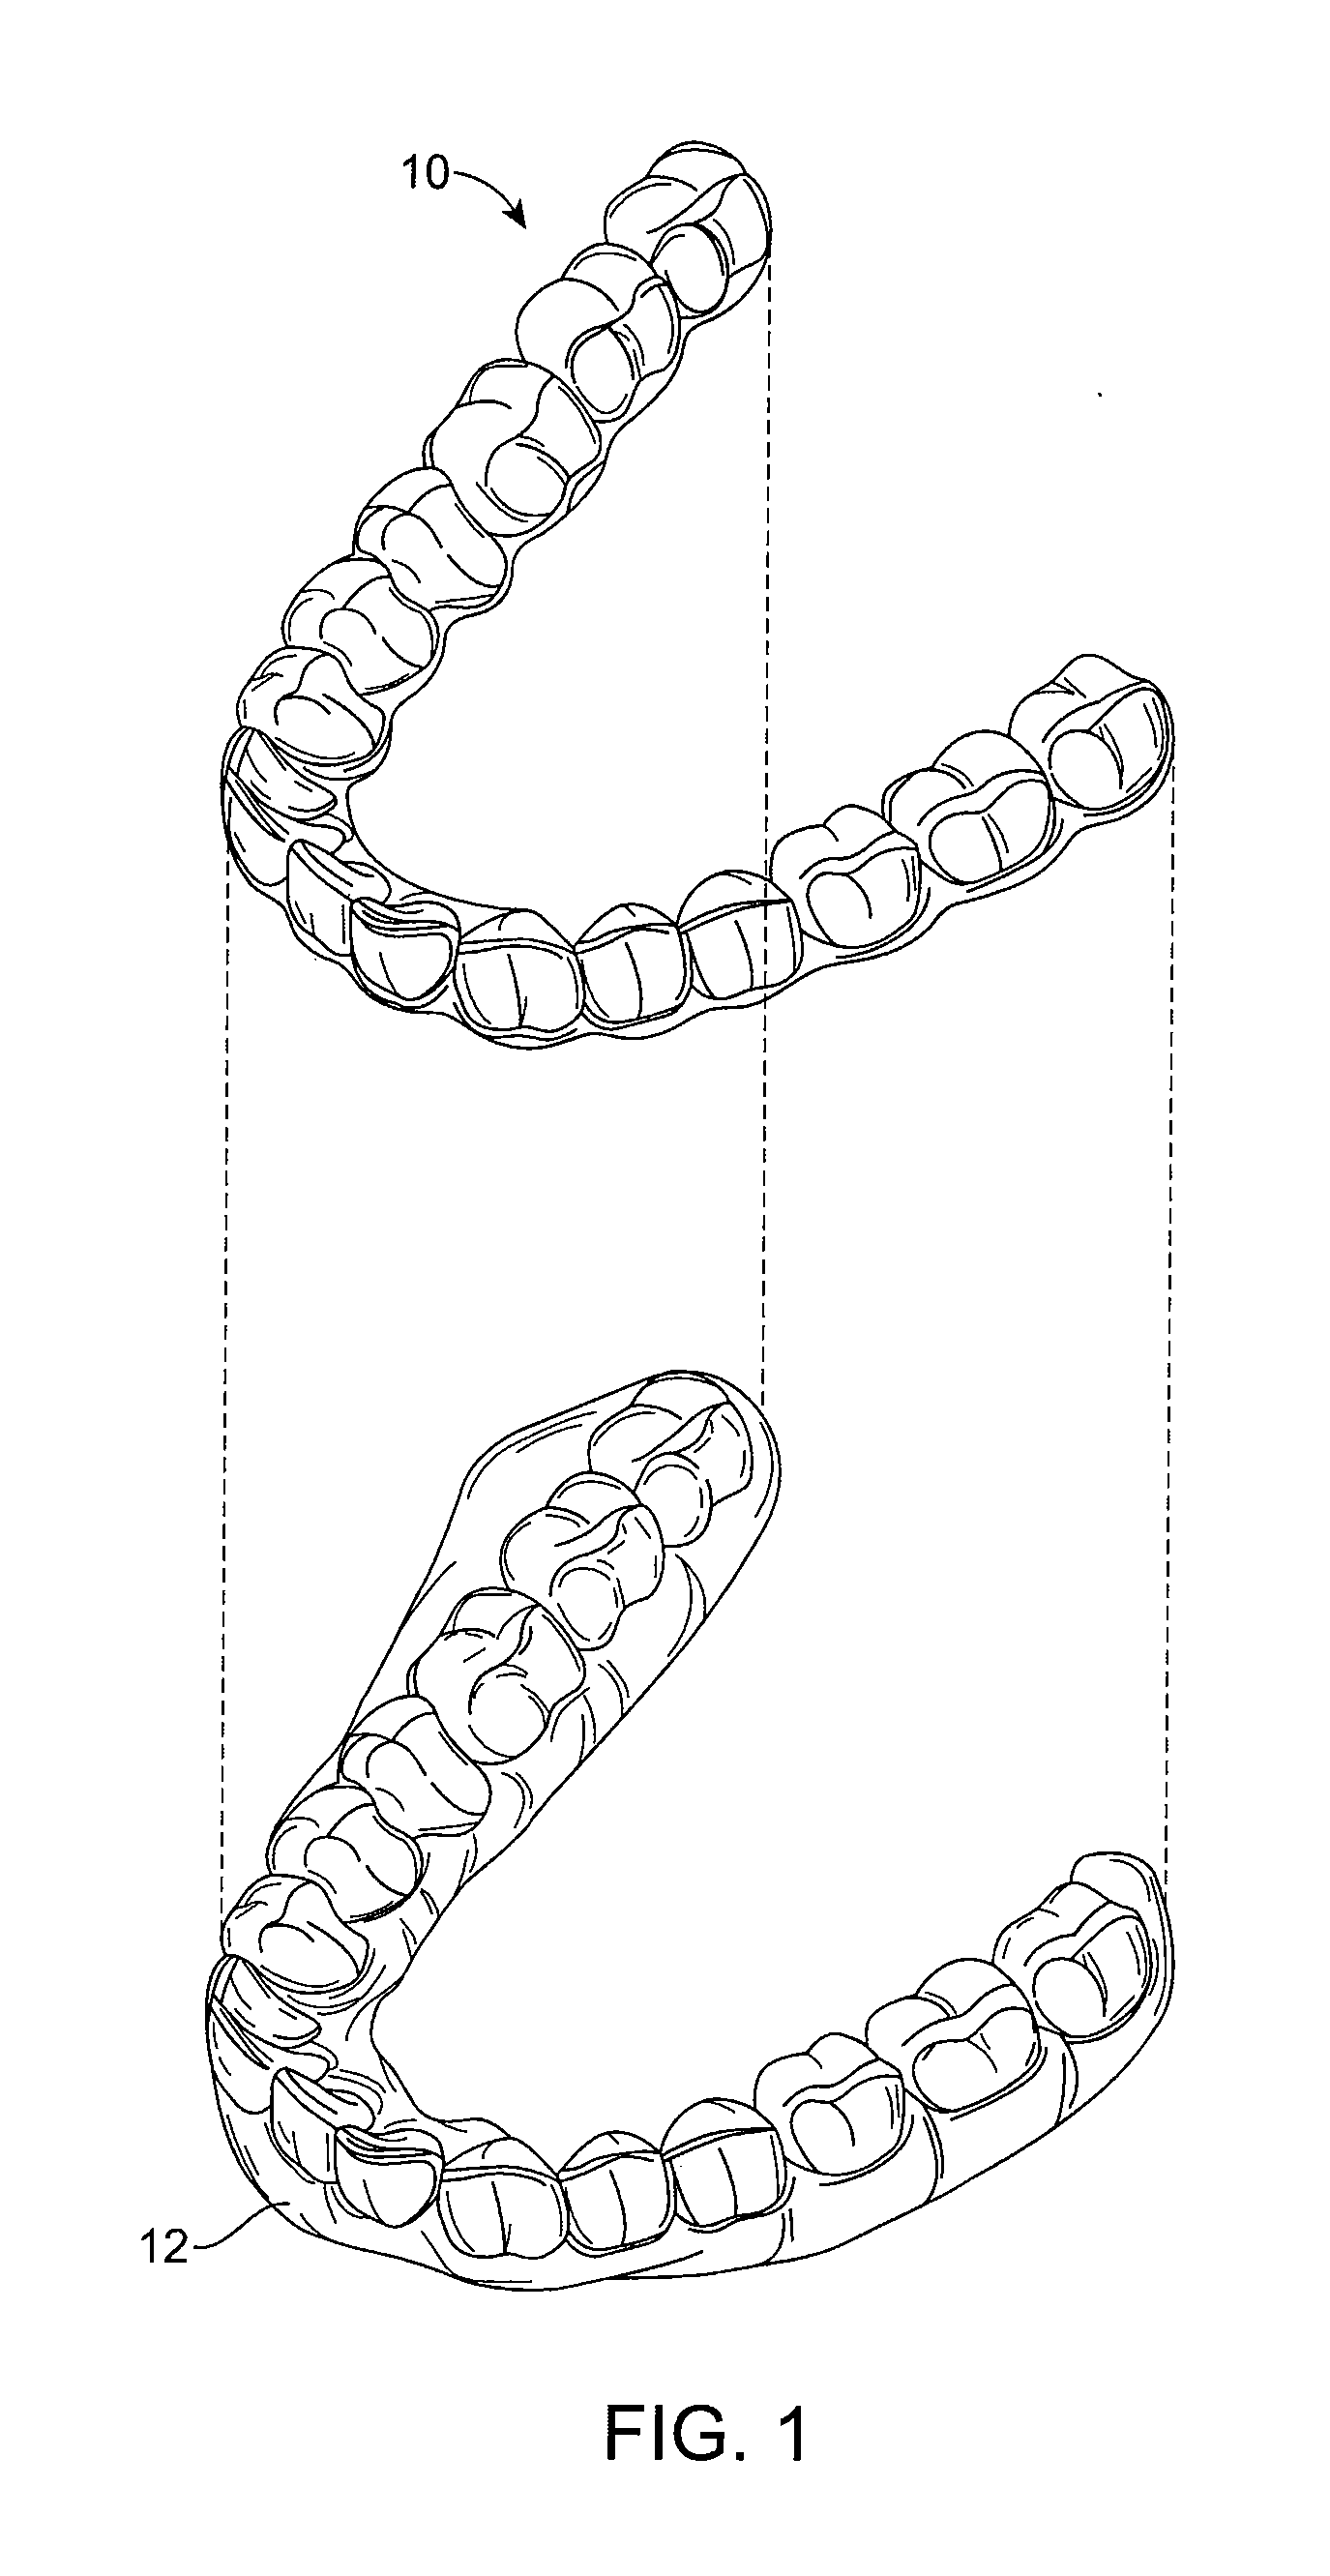 Systems and method for management and delivery of orthodontic treatment